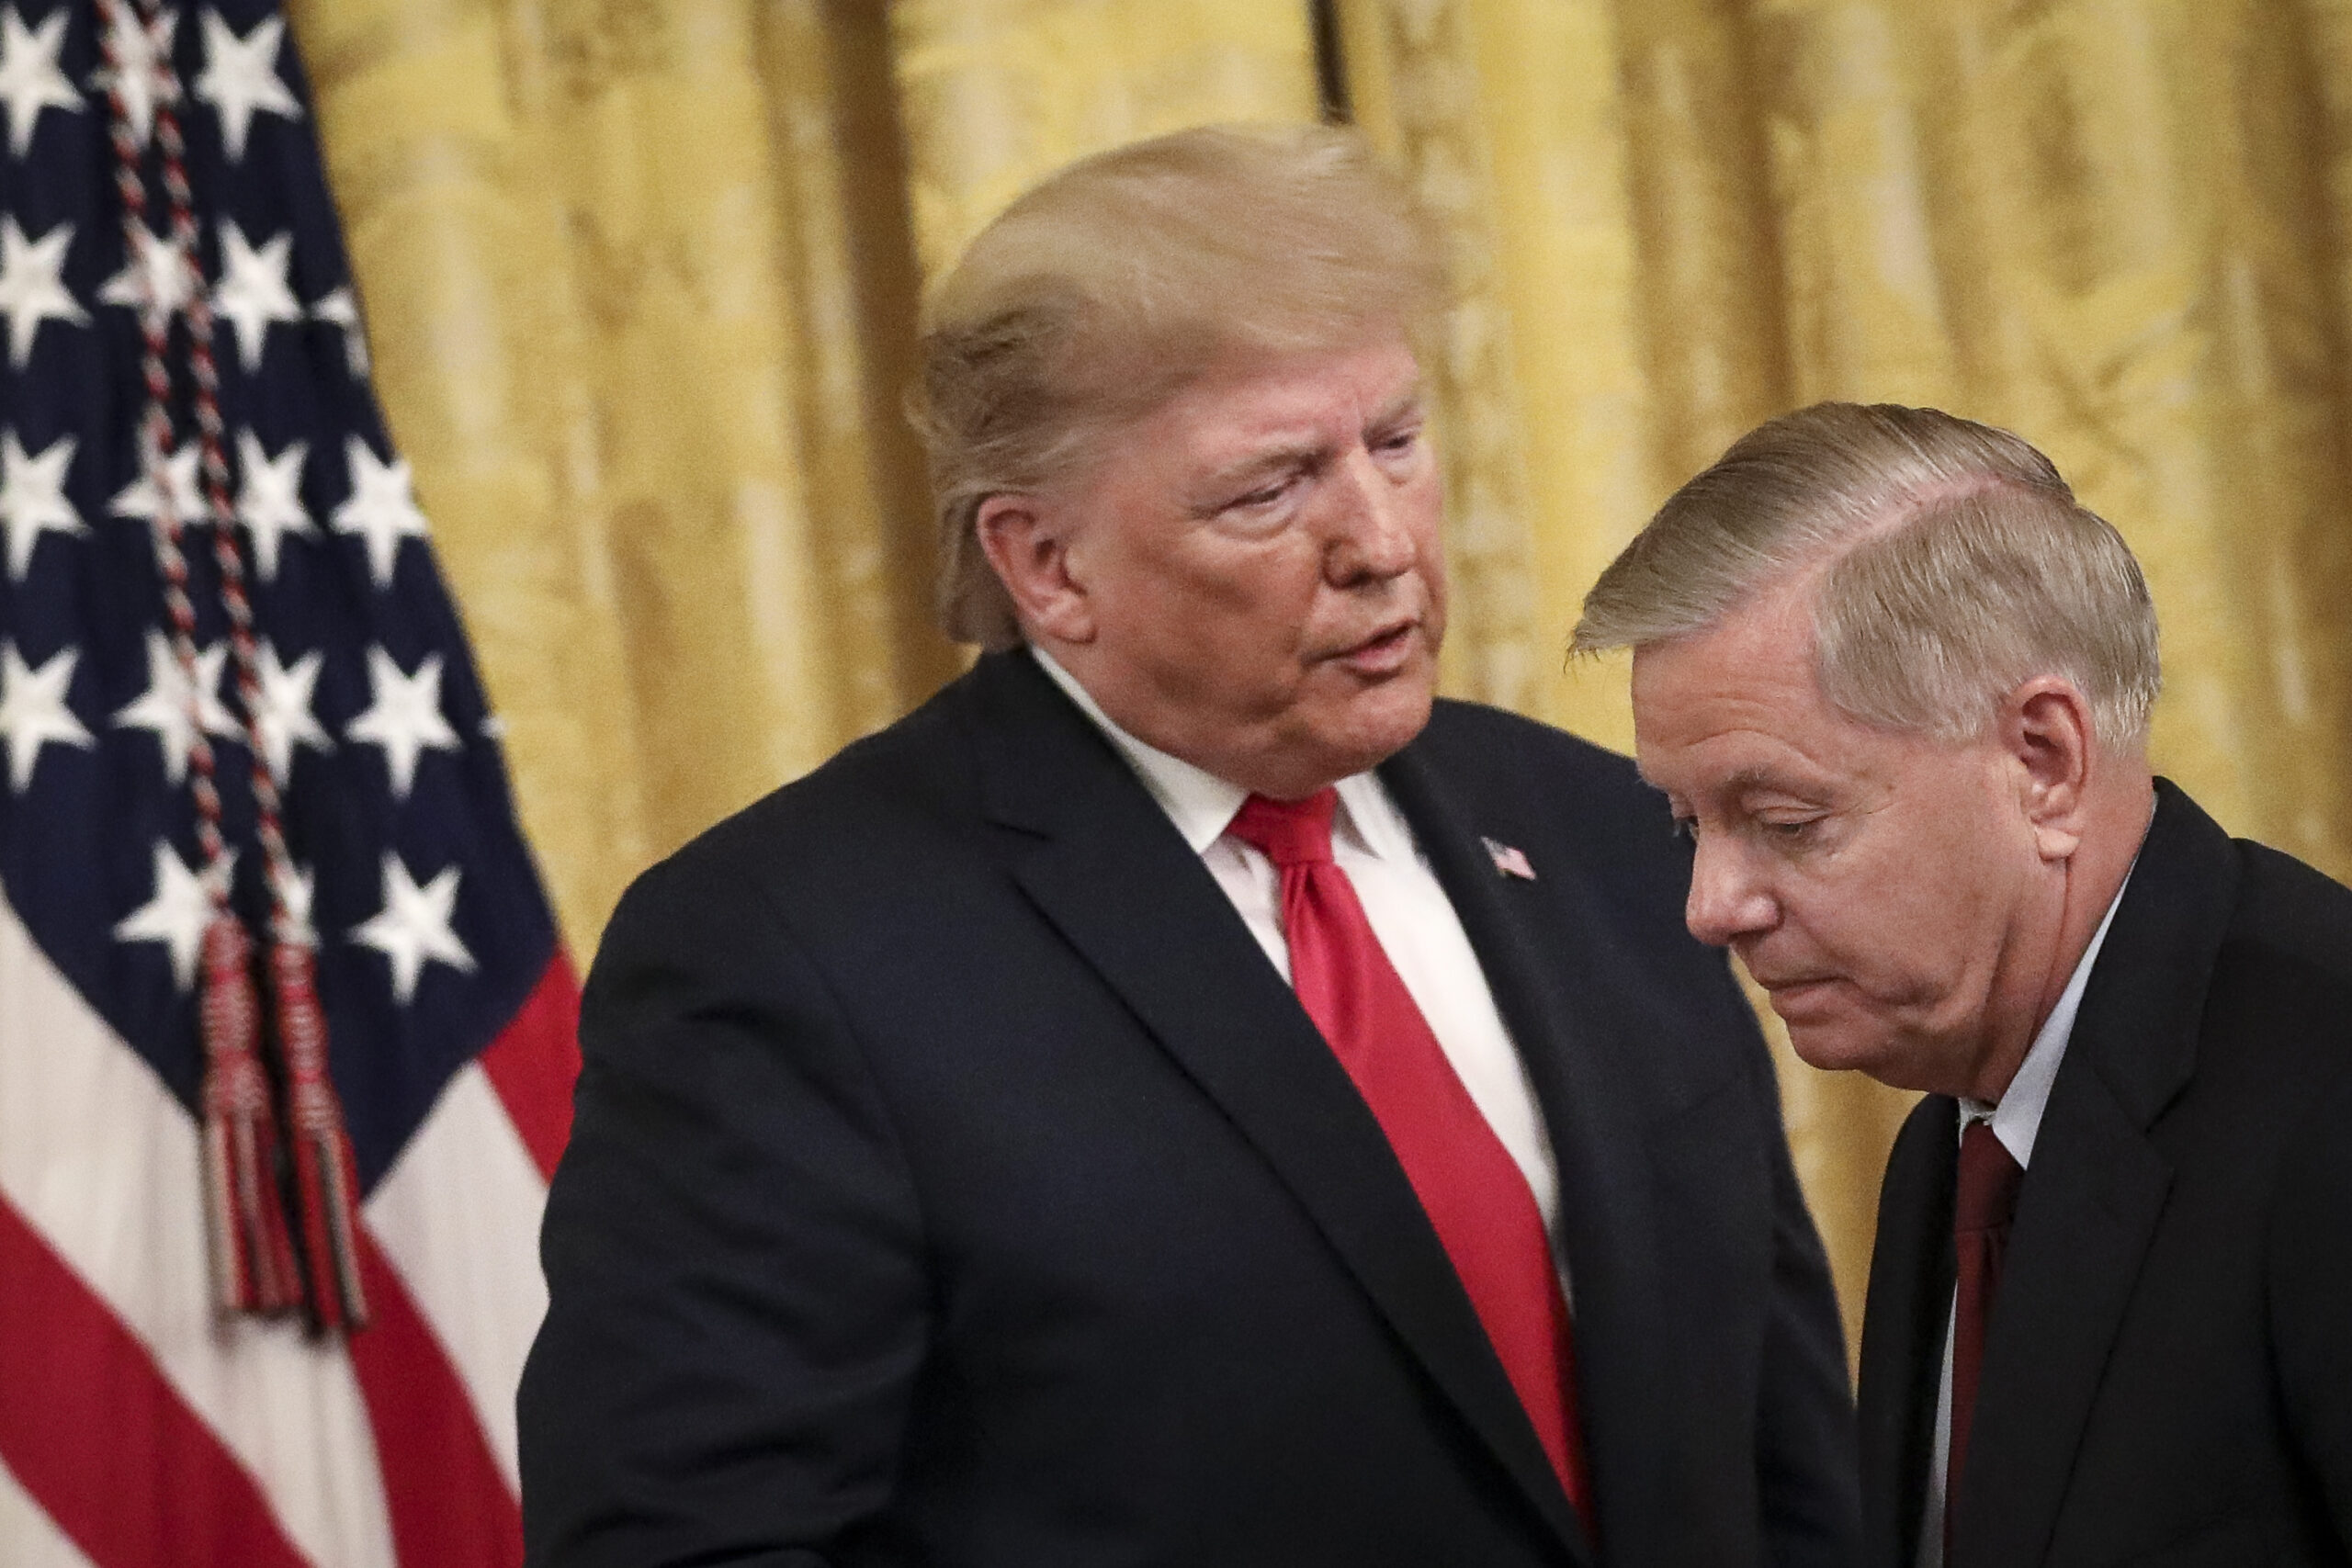 Lindsey Graham Reportedly Pushed for the 25th Amendment to Be Invoked on Jan. 6 to Oust Trump (mediaite.com)